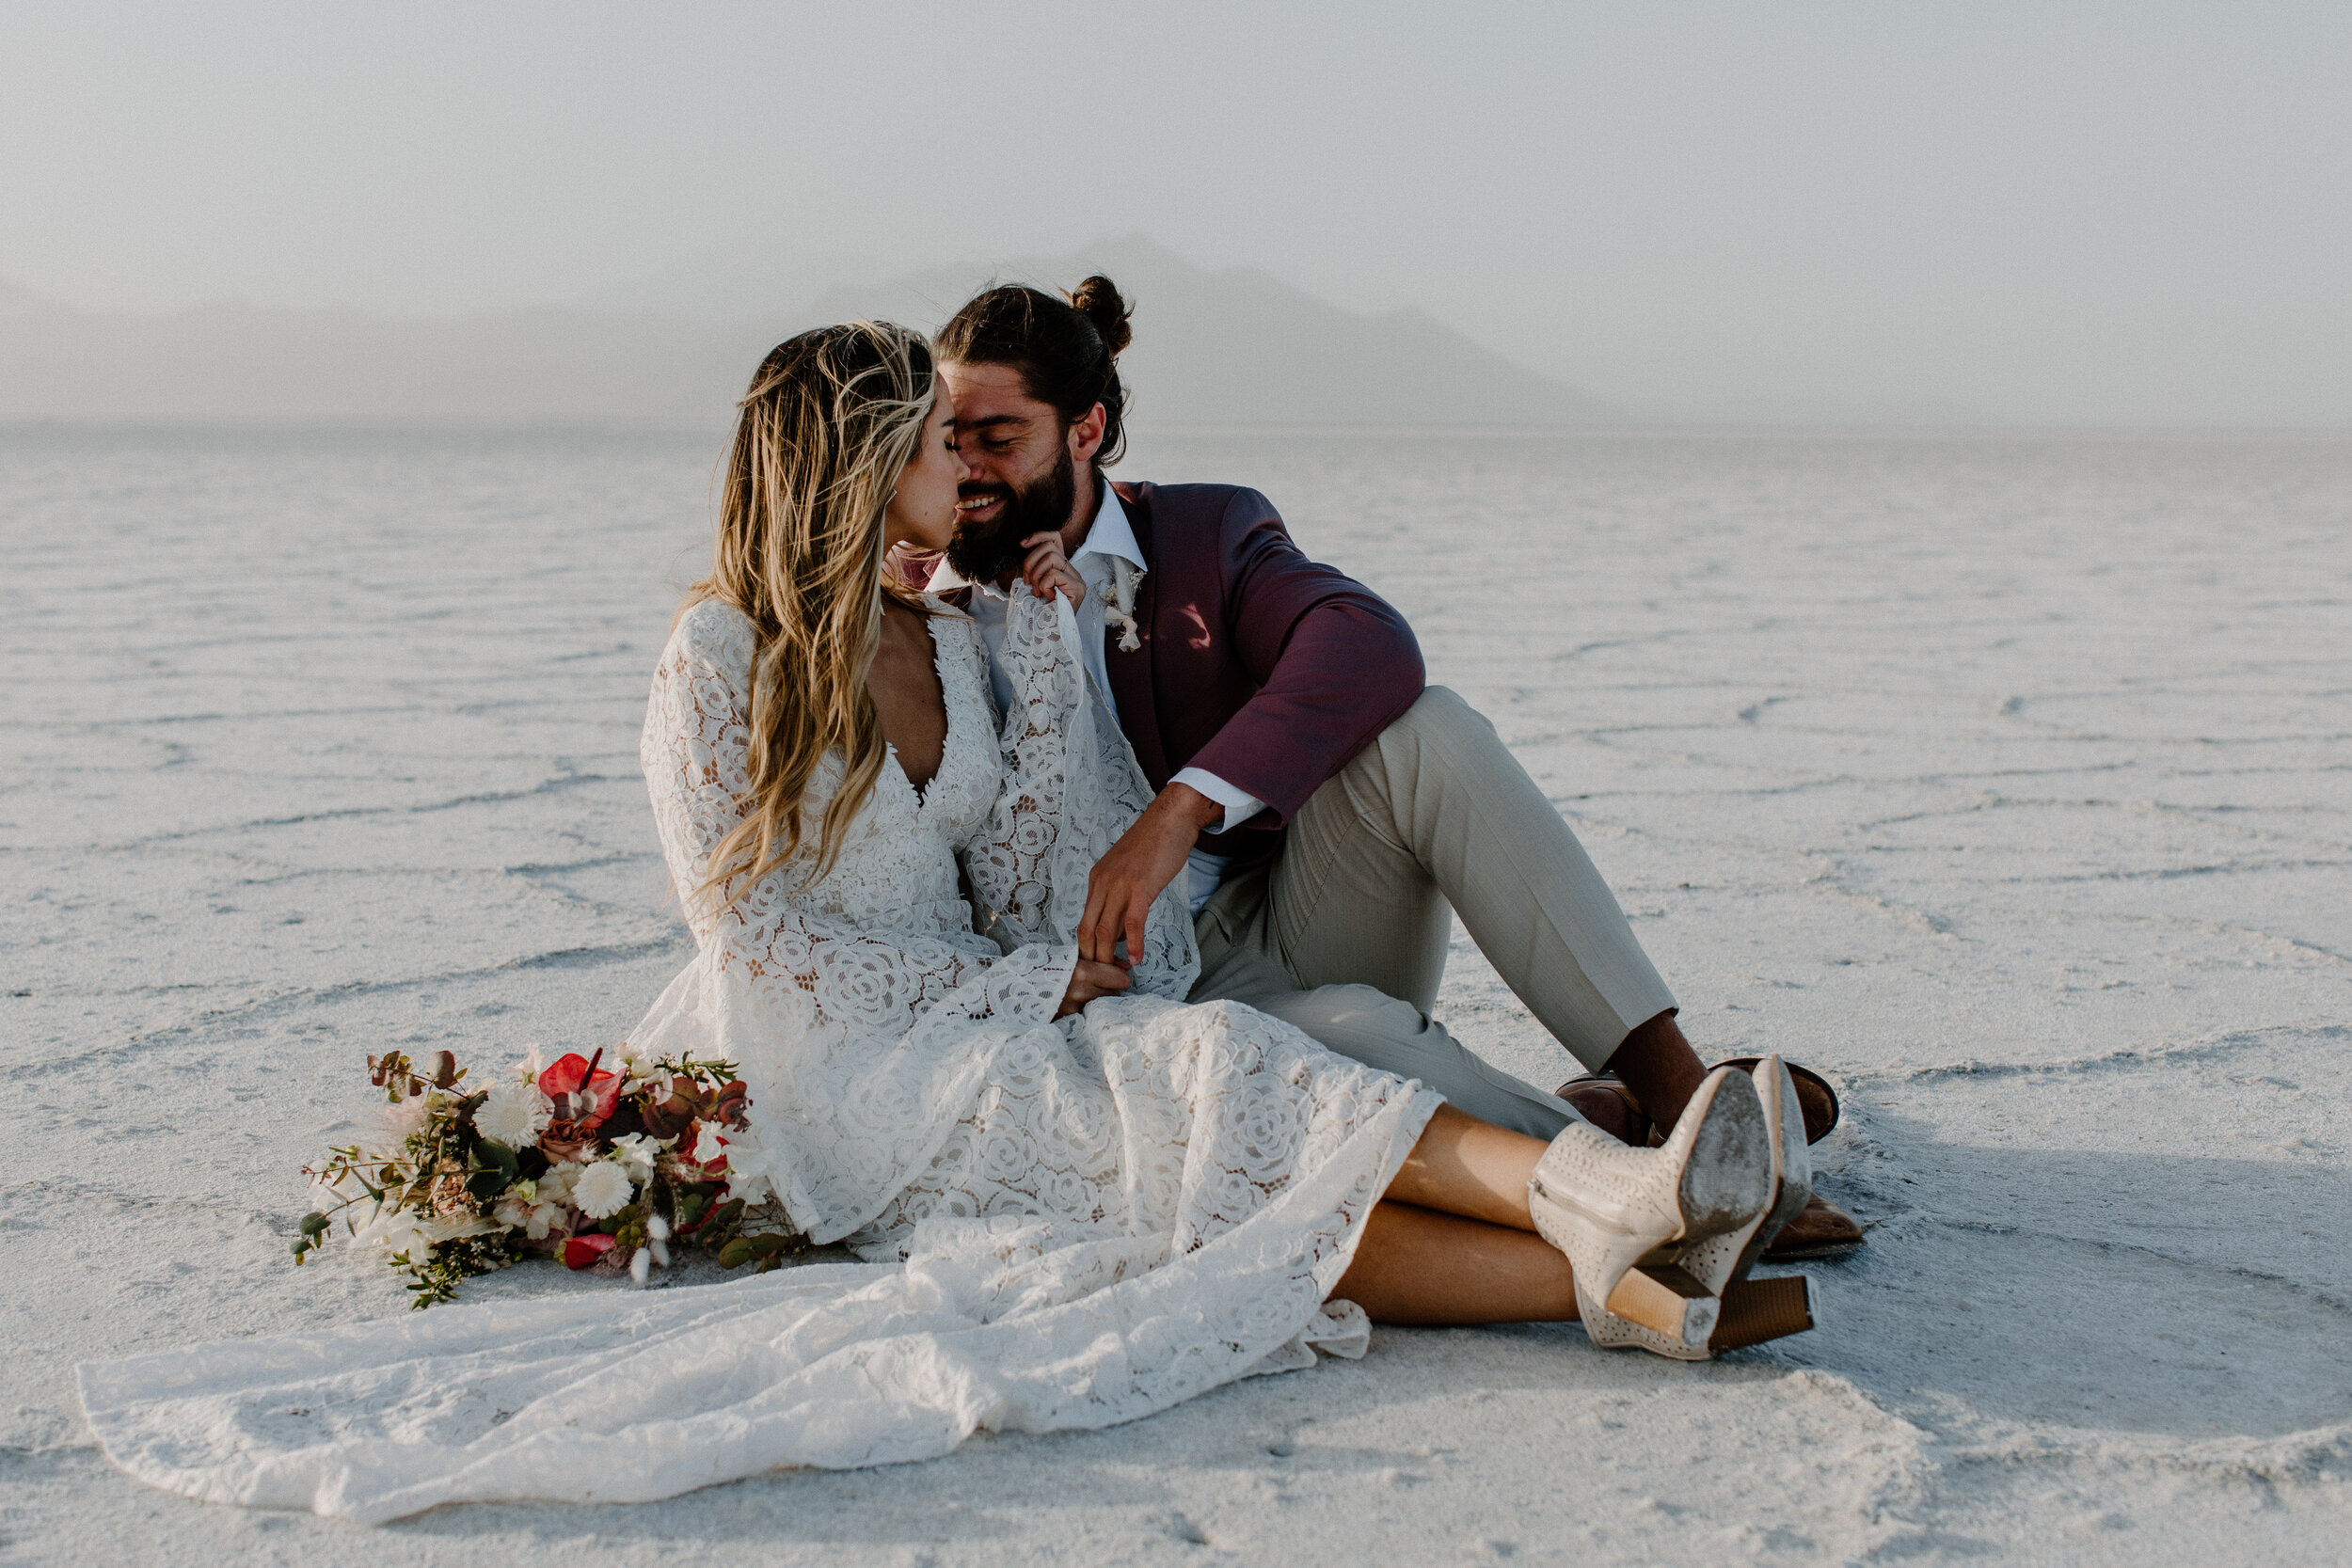 A destination wedding photoshoot in Booneville Salt Flats in Utah. The couple has a whimsical style, with the bride in a lace wedding dress and groom in a dusty pink suit.